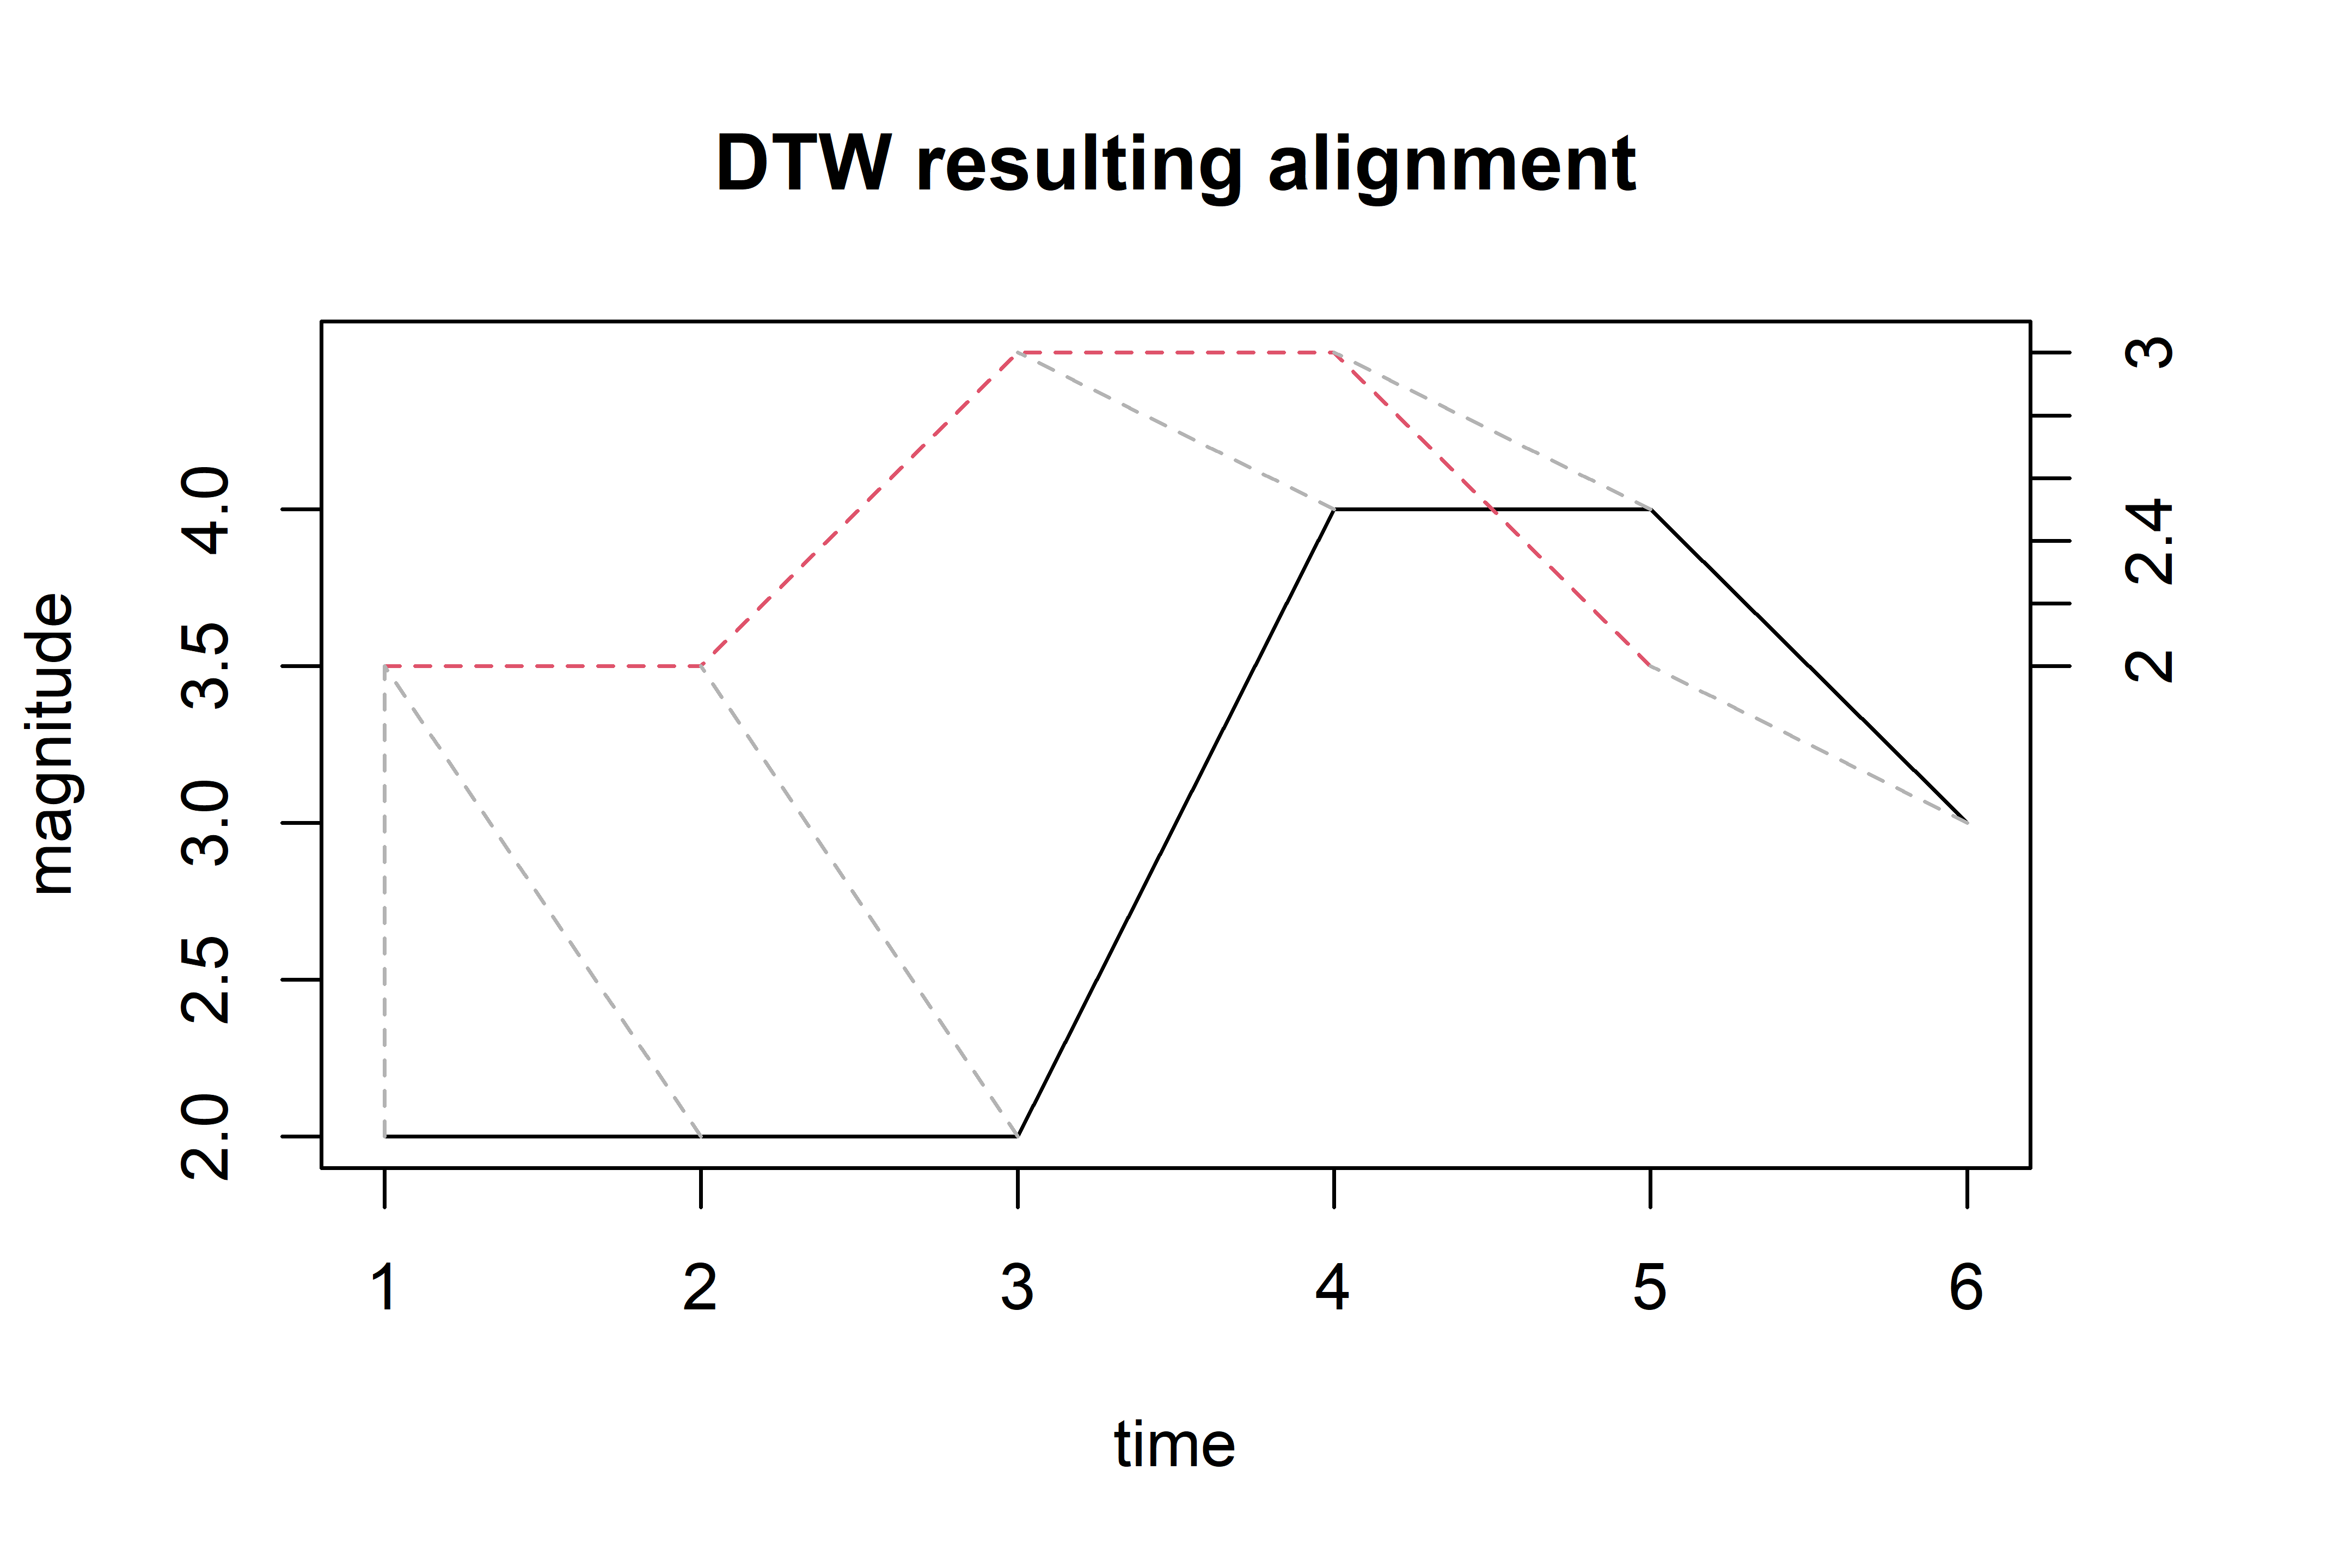 DTW alignment between the query and reference sequences (solid line is the query).